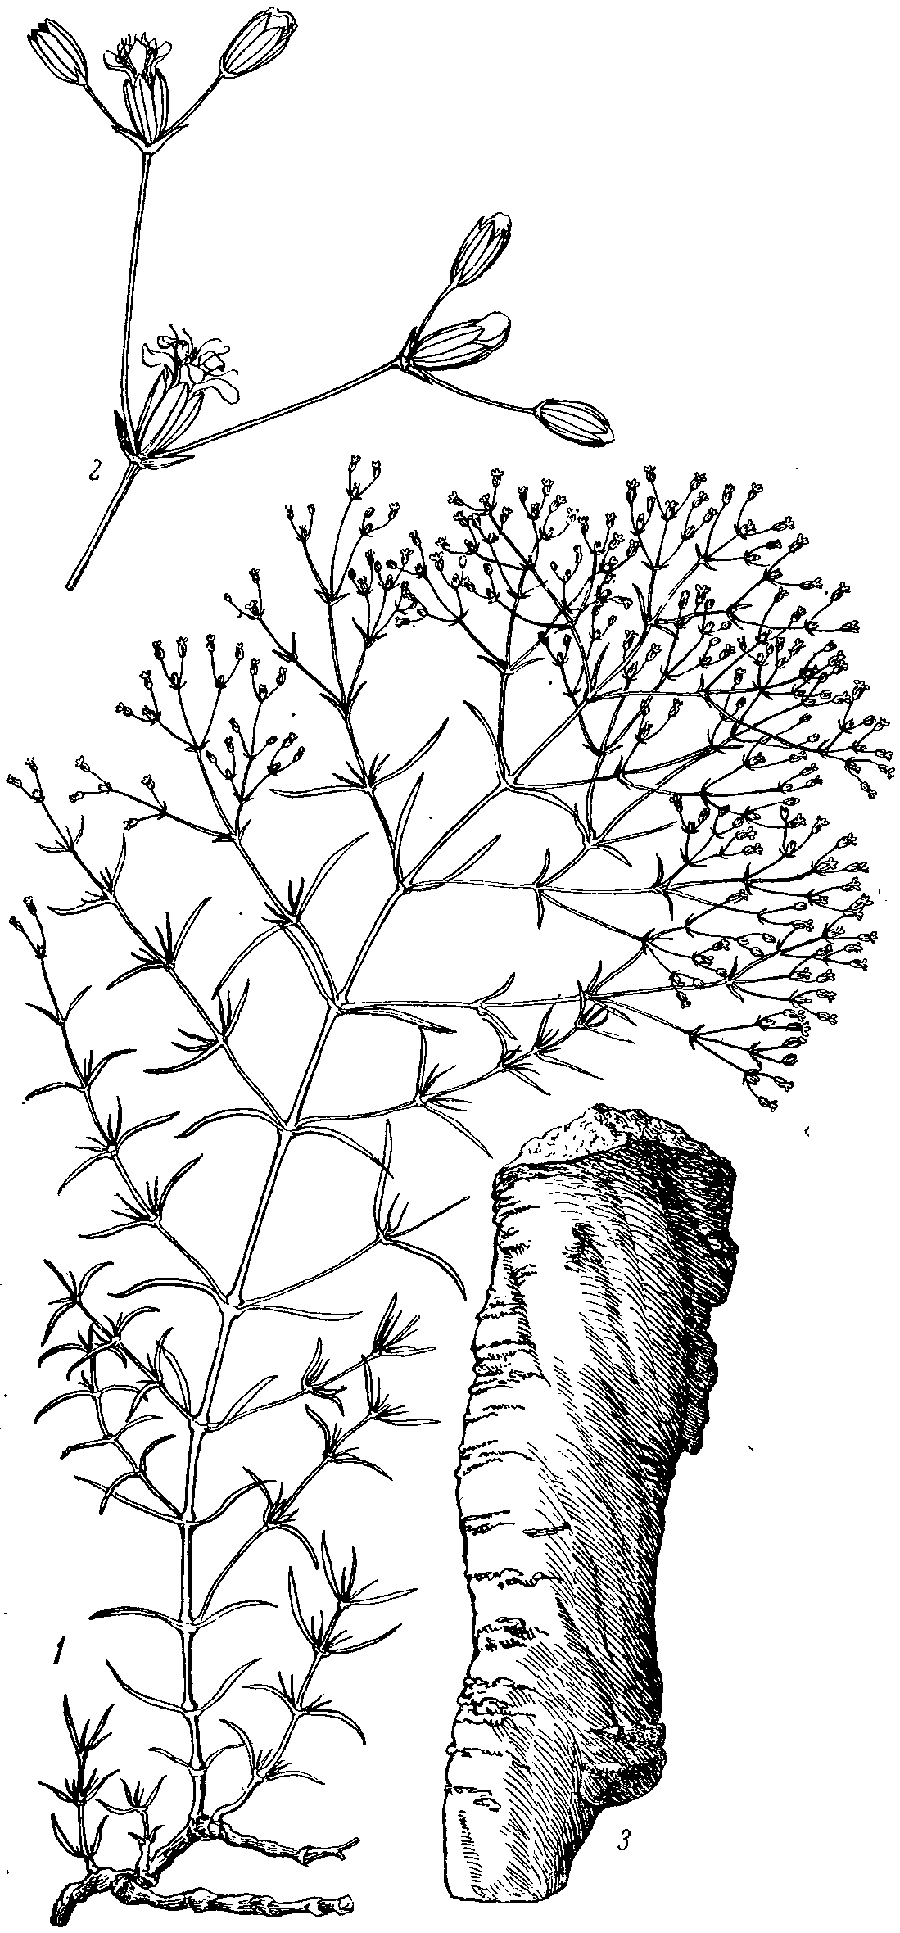 Allochrusa_gypsophiloides_2b.png